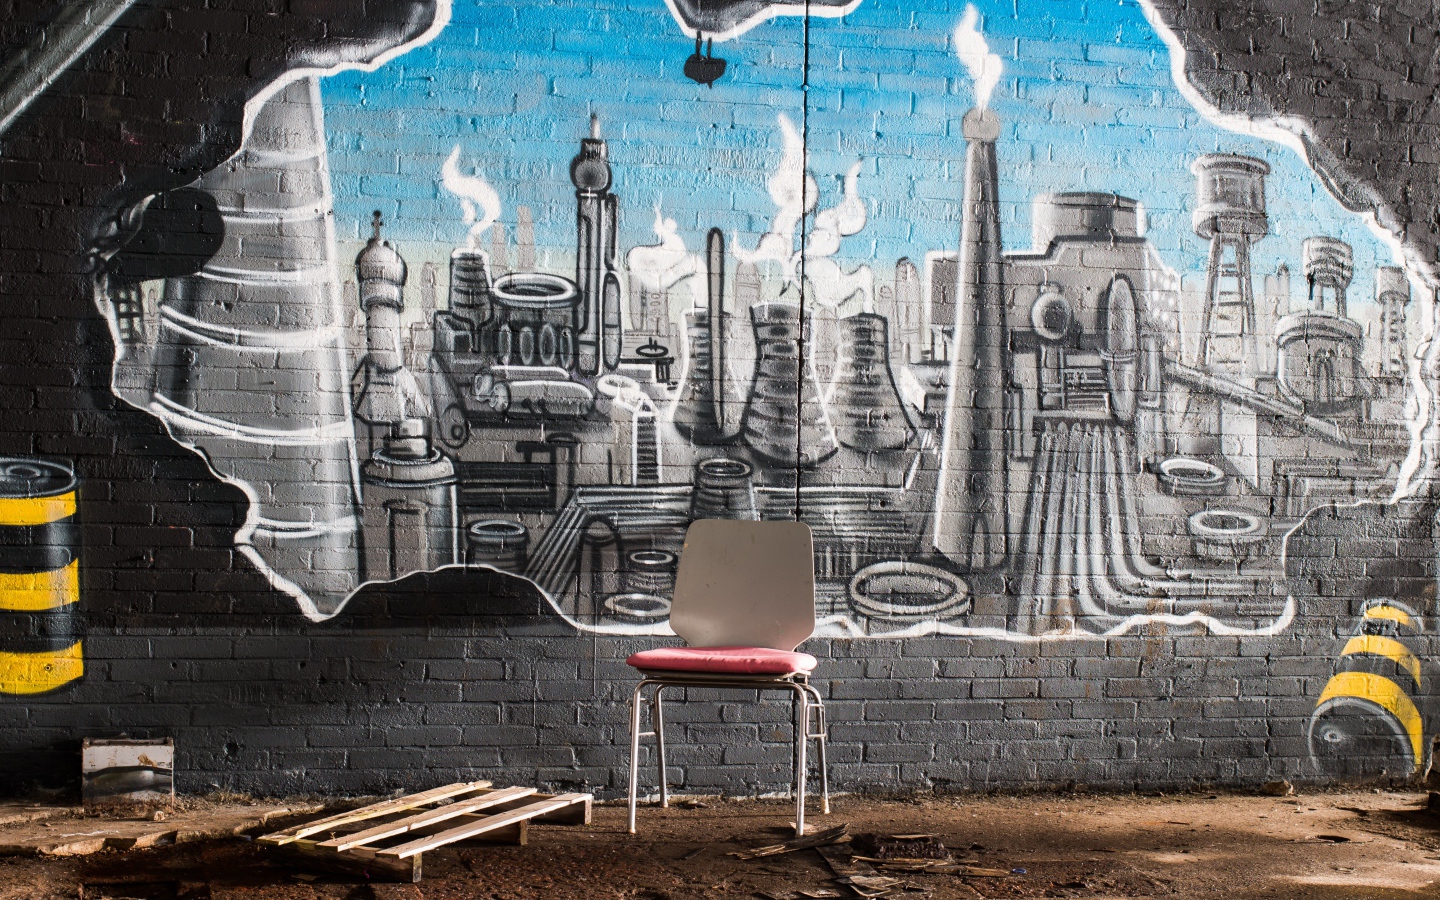 A chair stands by a brick wall with graffiti